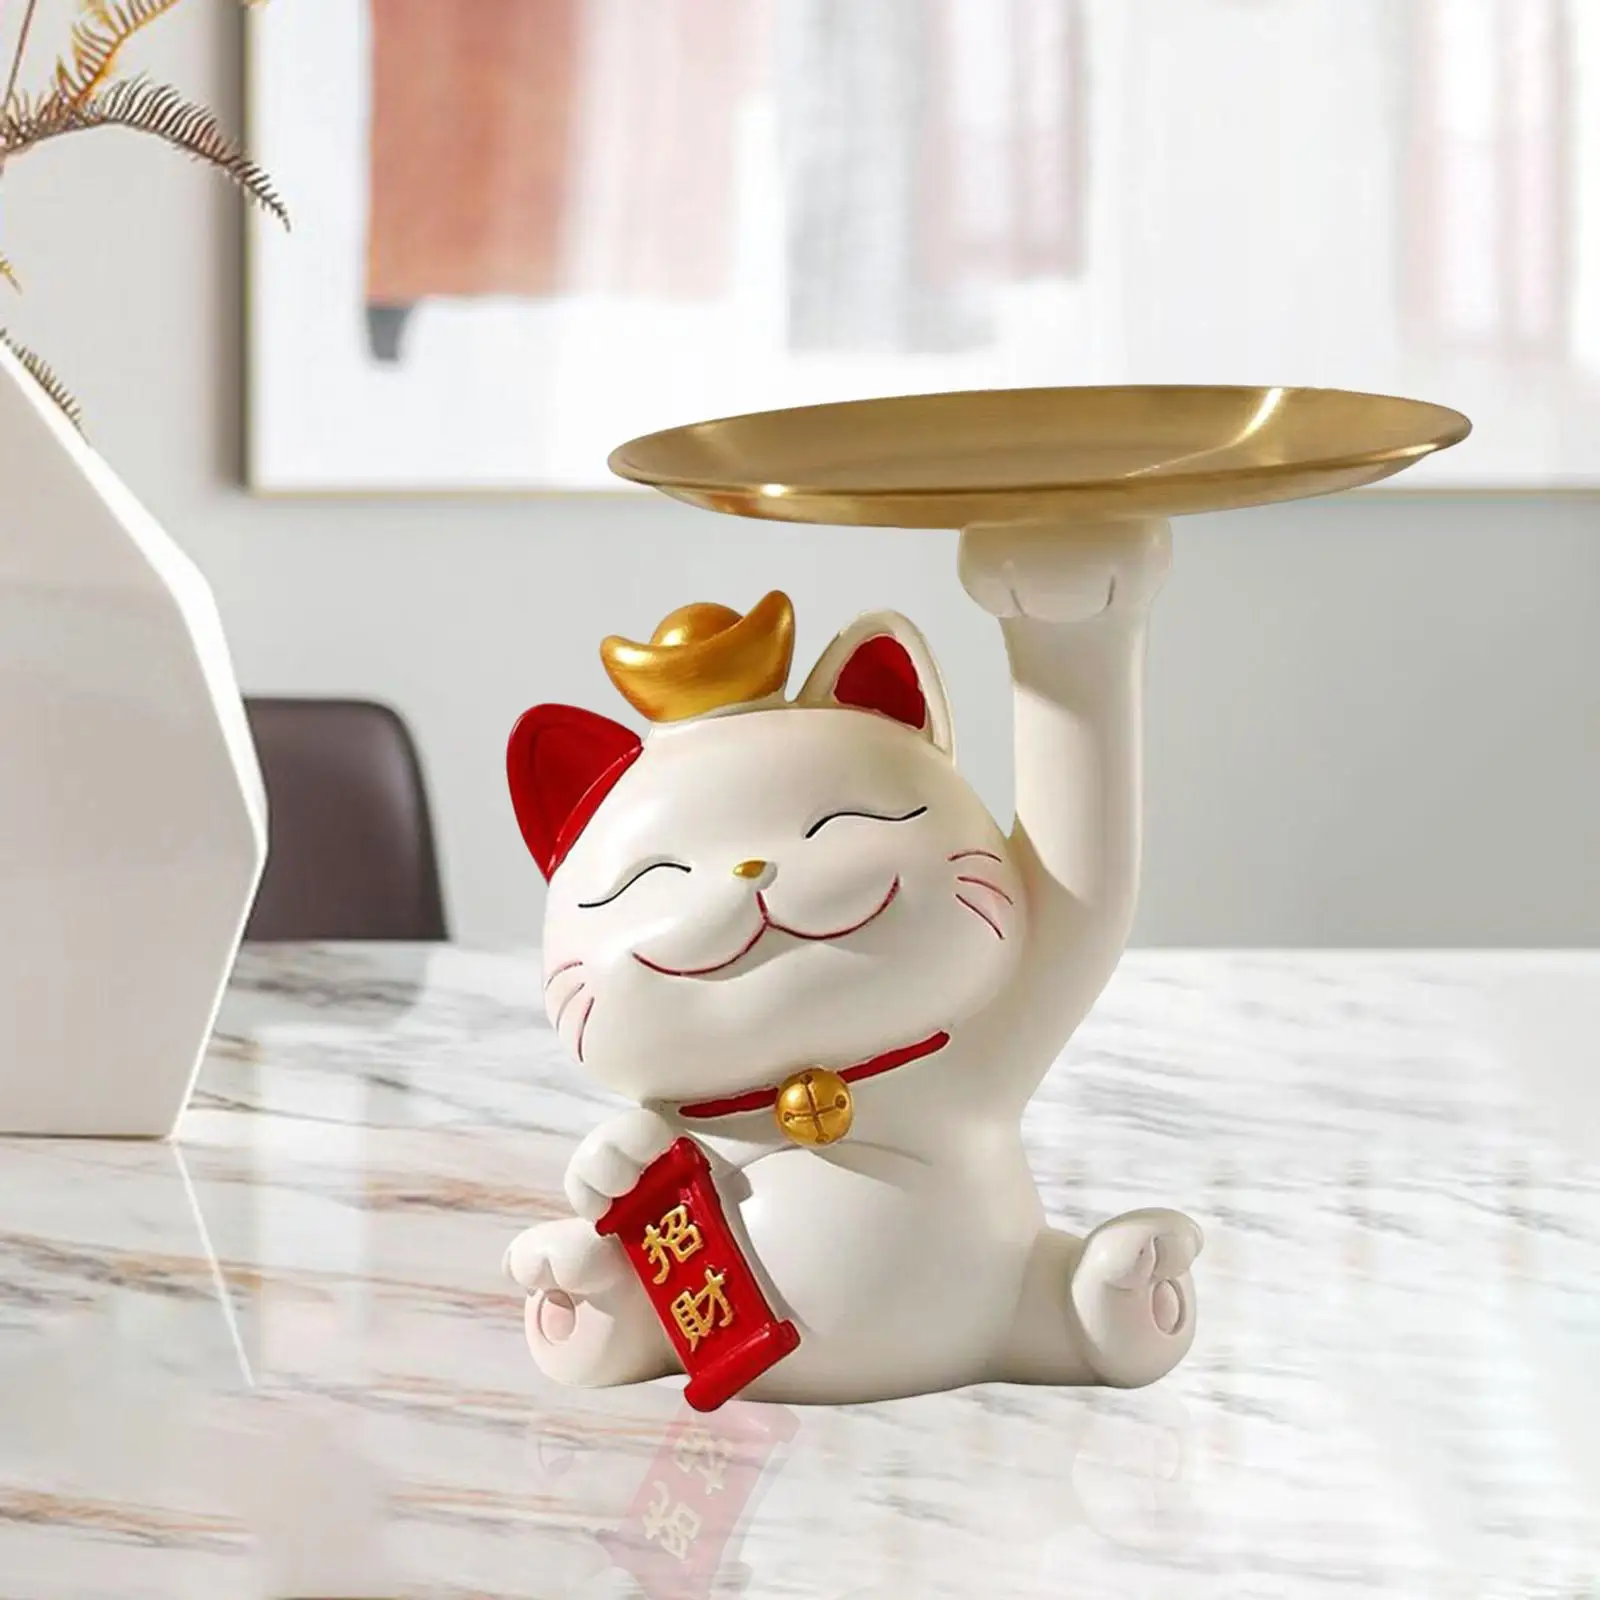 Cat Sculpture with Storage Tray Resin Storage Holder Sundries Container Cat Statue for Office Cabinet Living Room Decor Ornament